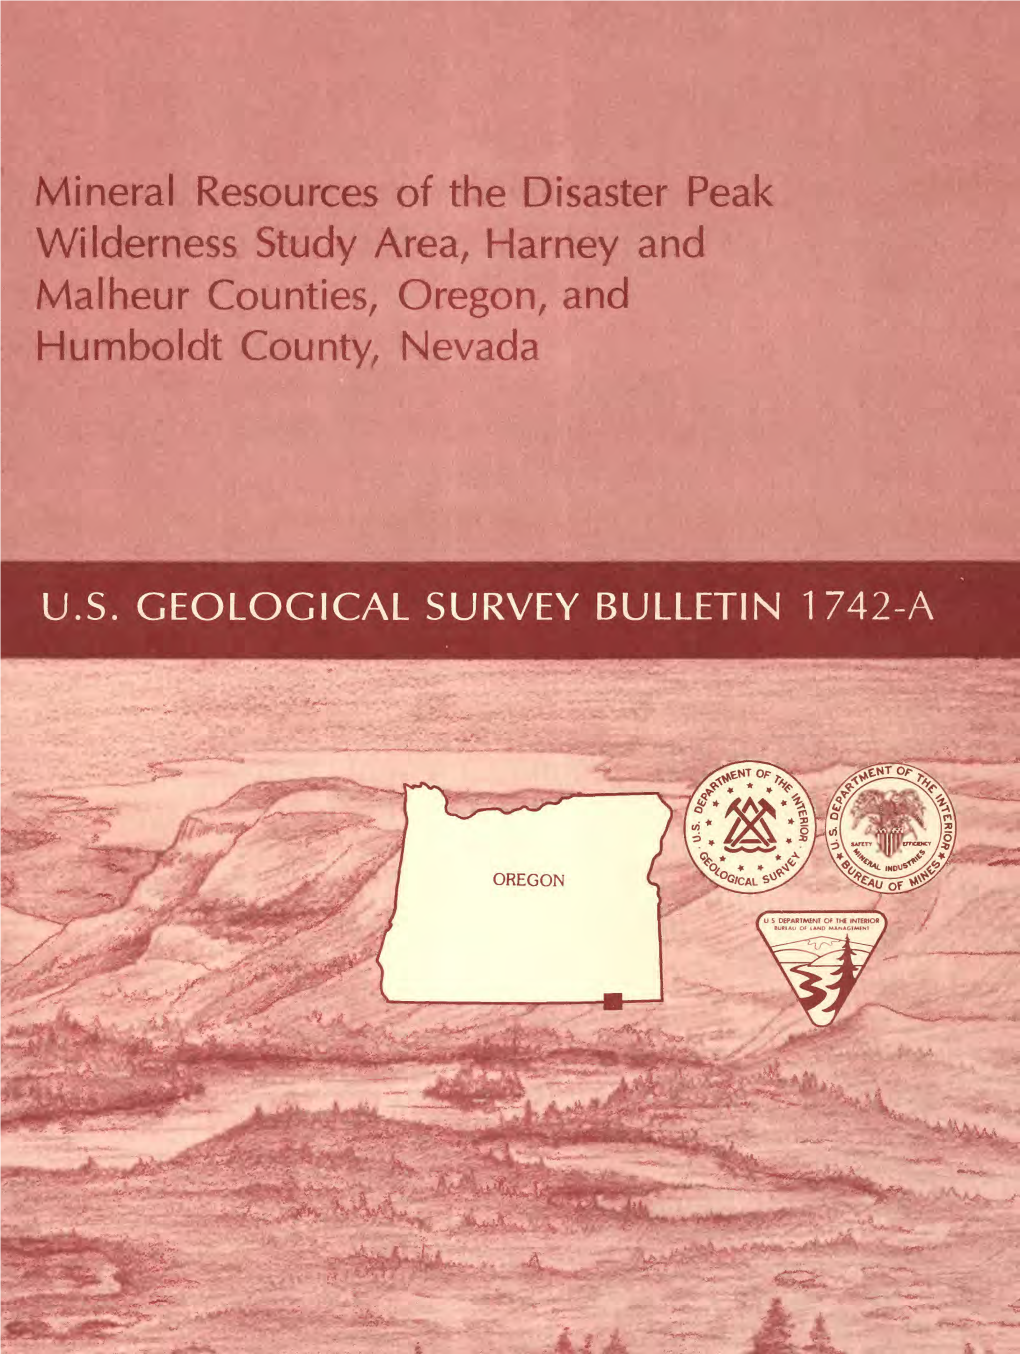 Mineral Resources of the Disaster Peak Wilderness Study Area, Harney and Malheur Counties, Oregon, and Humboldt County, Nevada